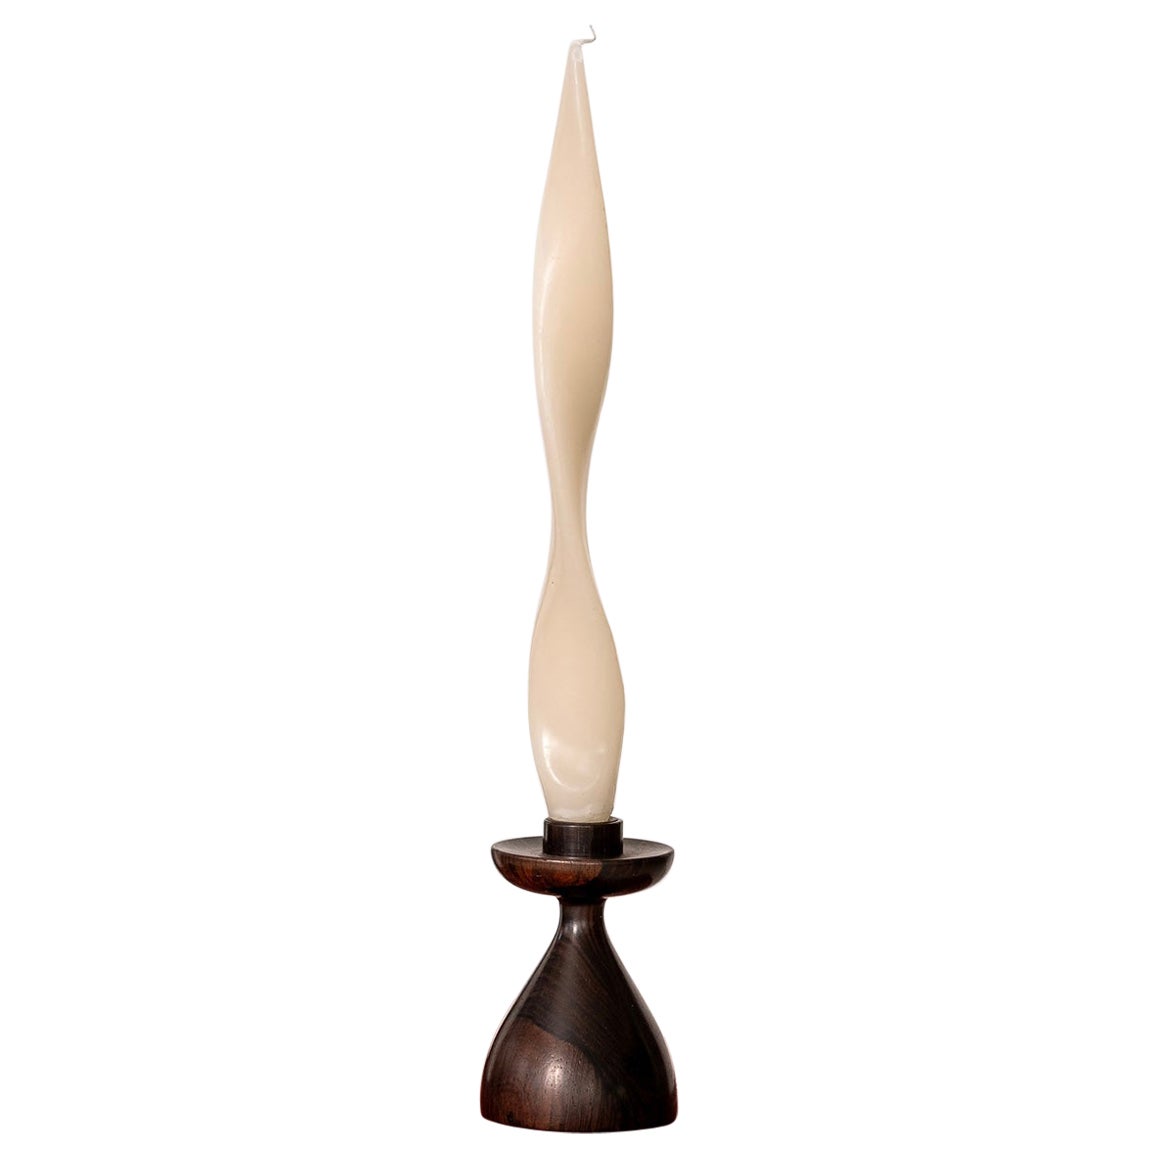 Brazilian Midcentury Candlestick in Rosewood by Casa Finland, c. 1970 For Sale